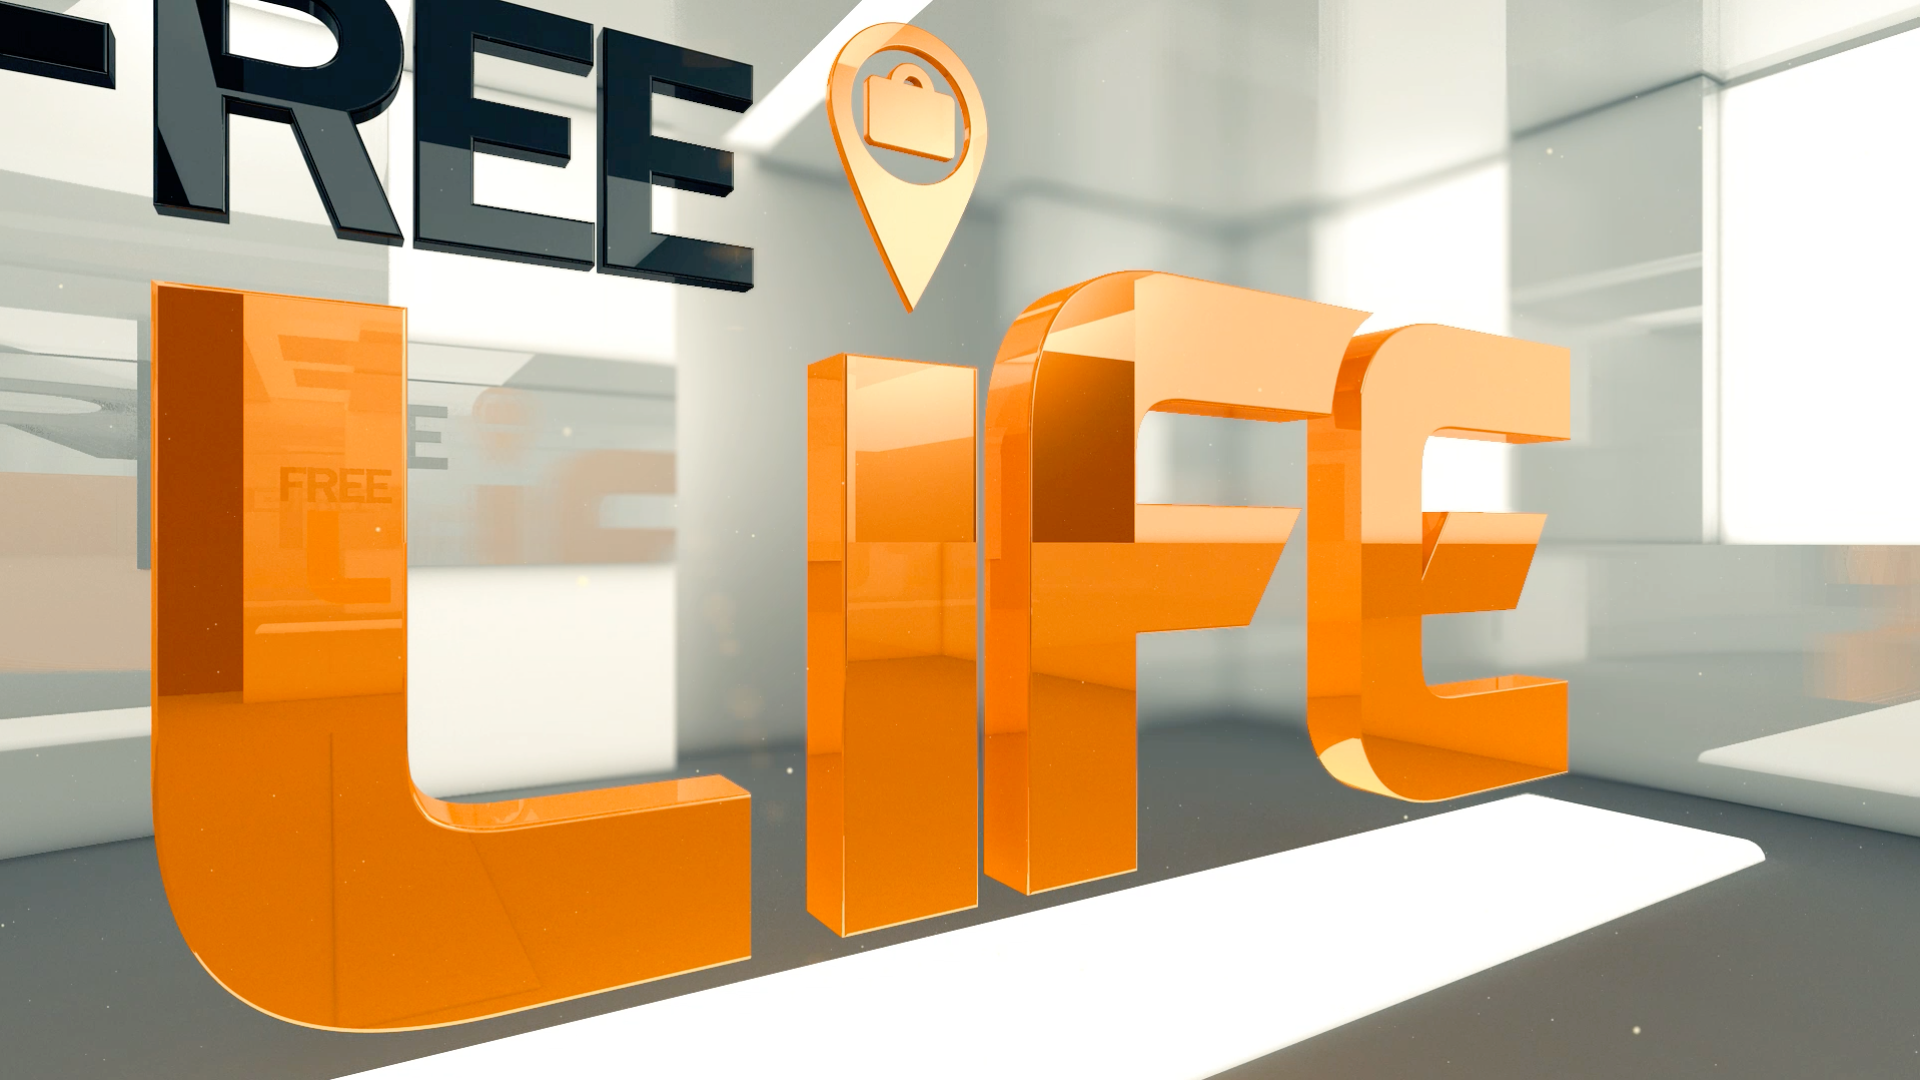 FREE LIFE - TV Channel Logo Animation on Behance